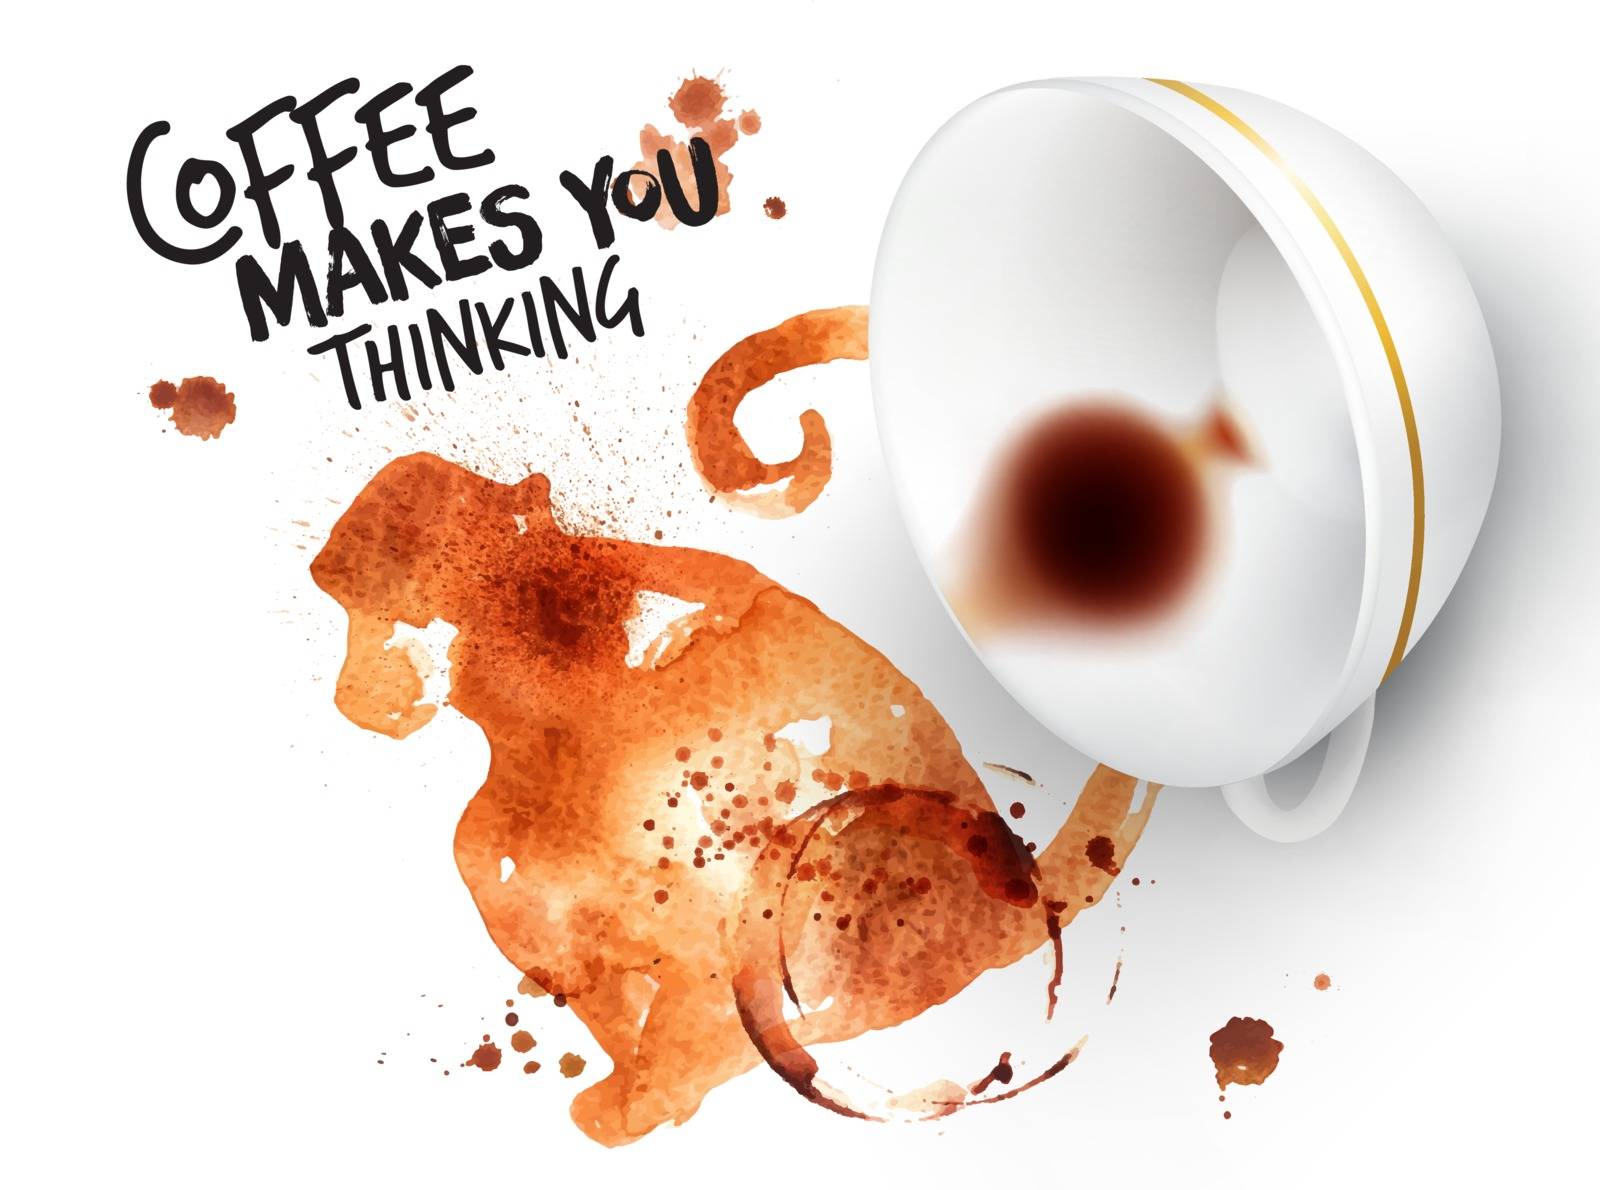 Poster drawn coffee imprint of monkey and inverted cup with spilled coffee, lettering coffee makes you thinking.